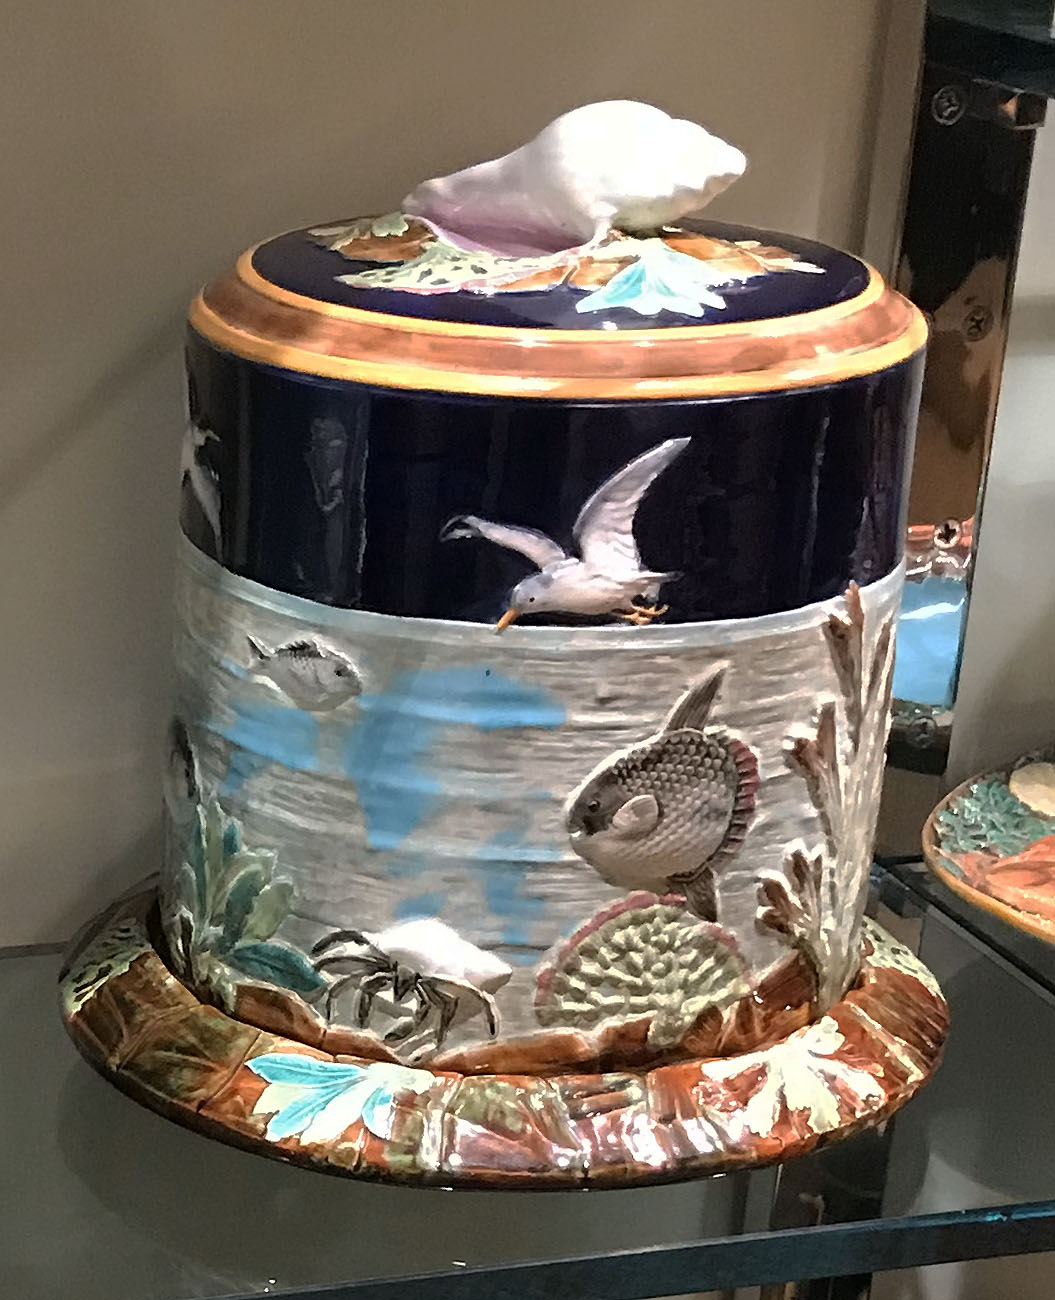 A George Jones Underwater cheese keeper, a pattern also known as Sea and Sky, is among the desirable examples collectors gravitate towards. Image courtesy of Nick Boston.